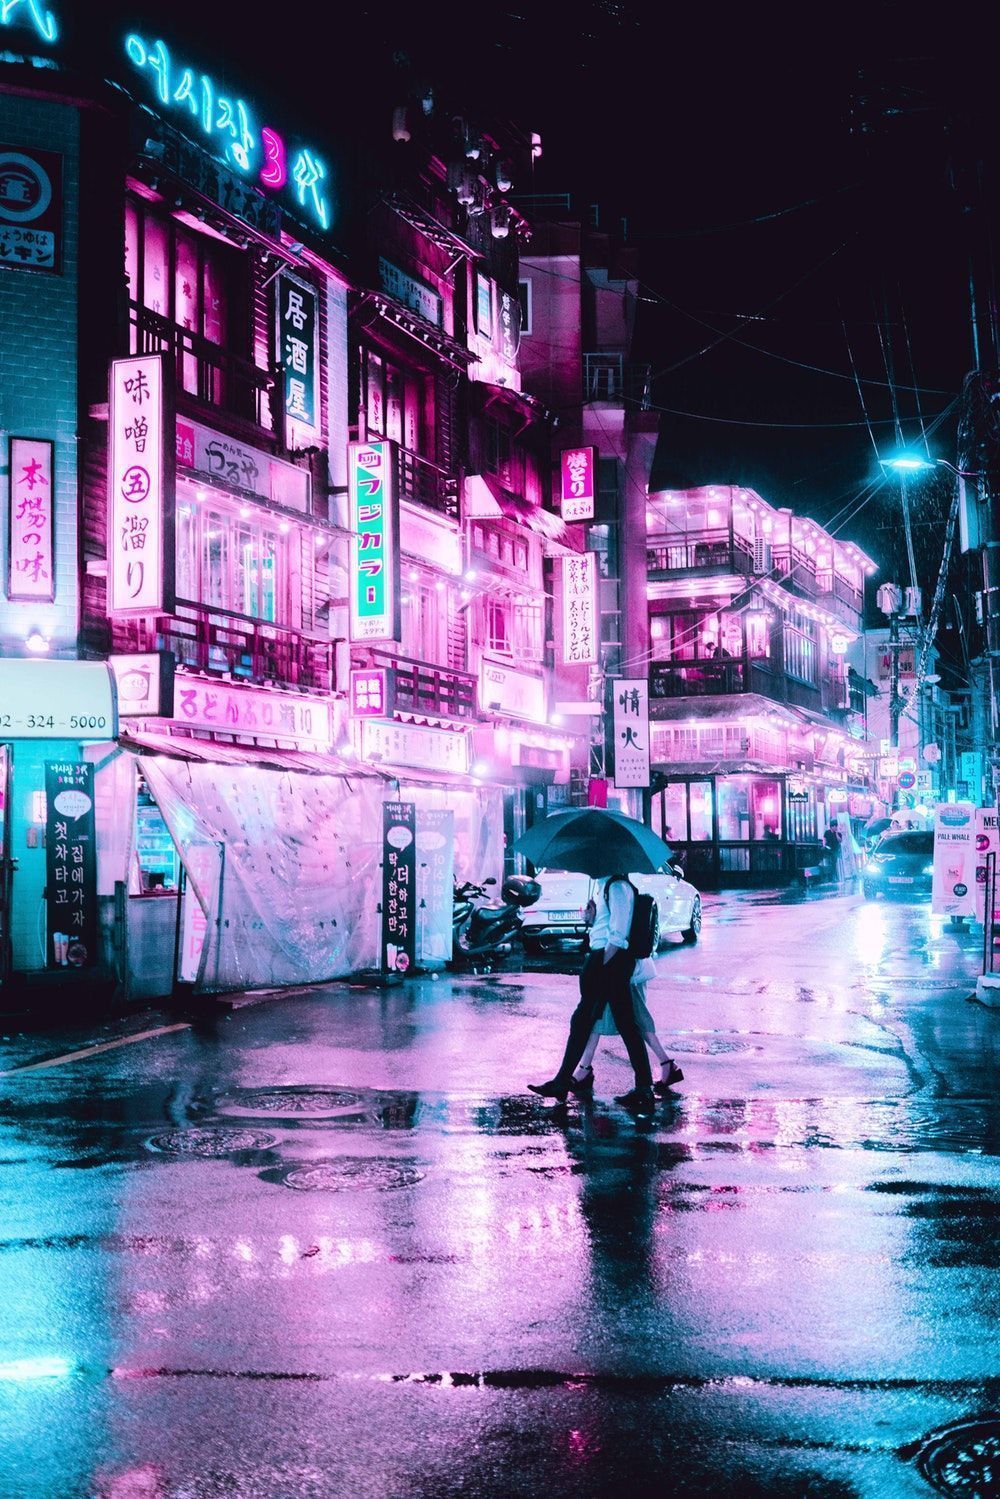 A person walking down the street with an umbrella - Seoul, neon pink